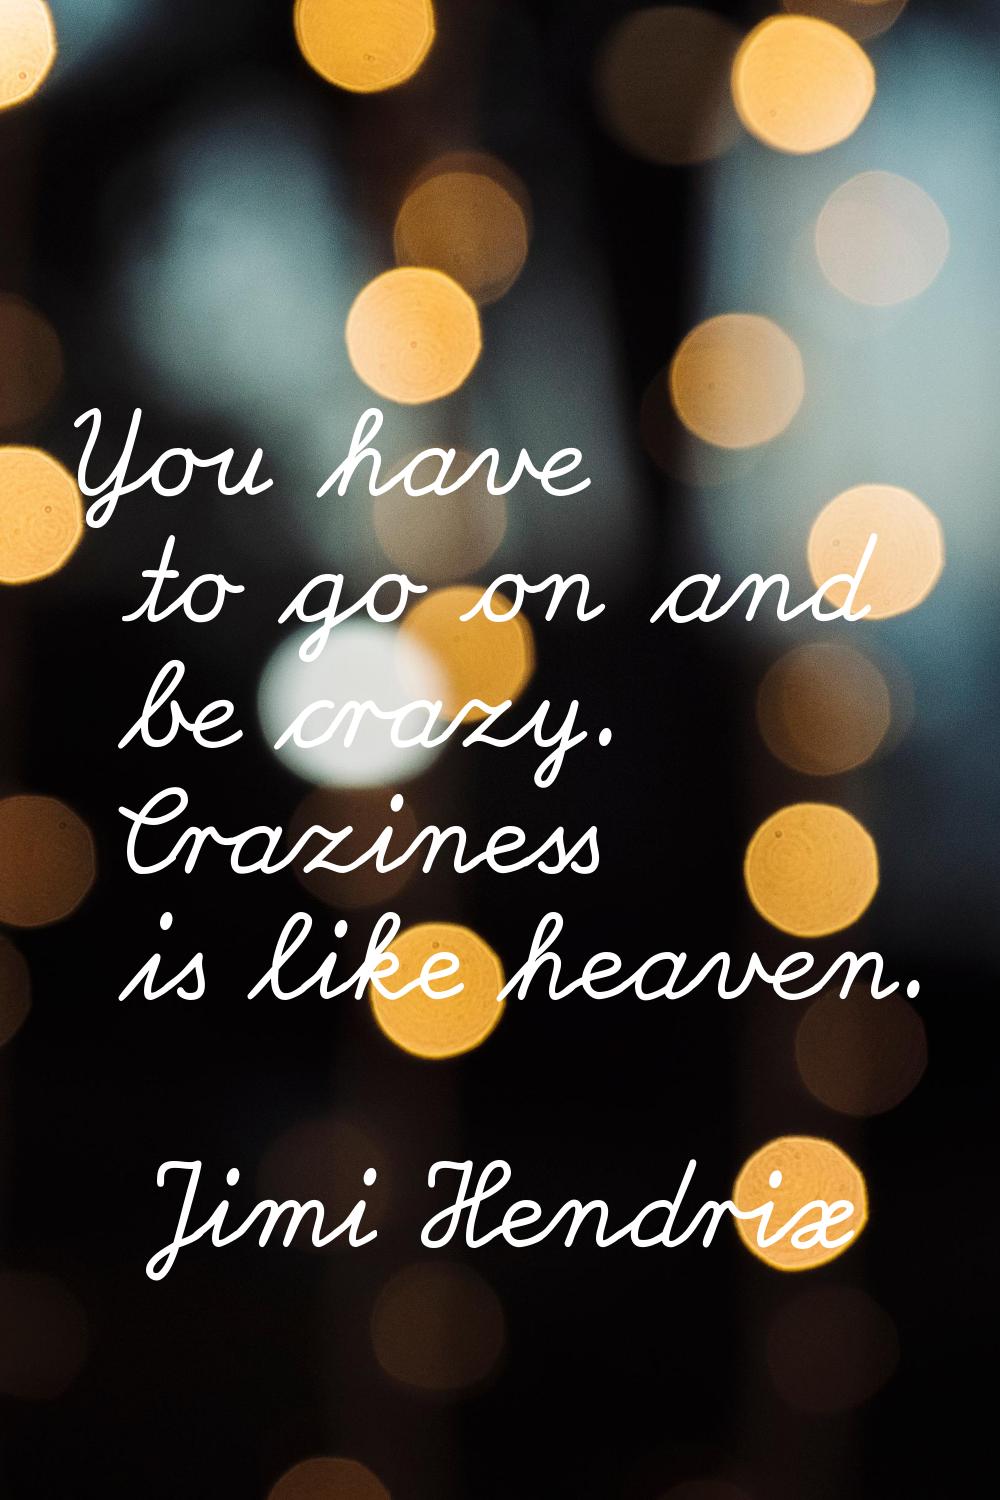 You have to go on and be crazy. Craziness is like heaven.